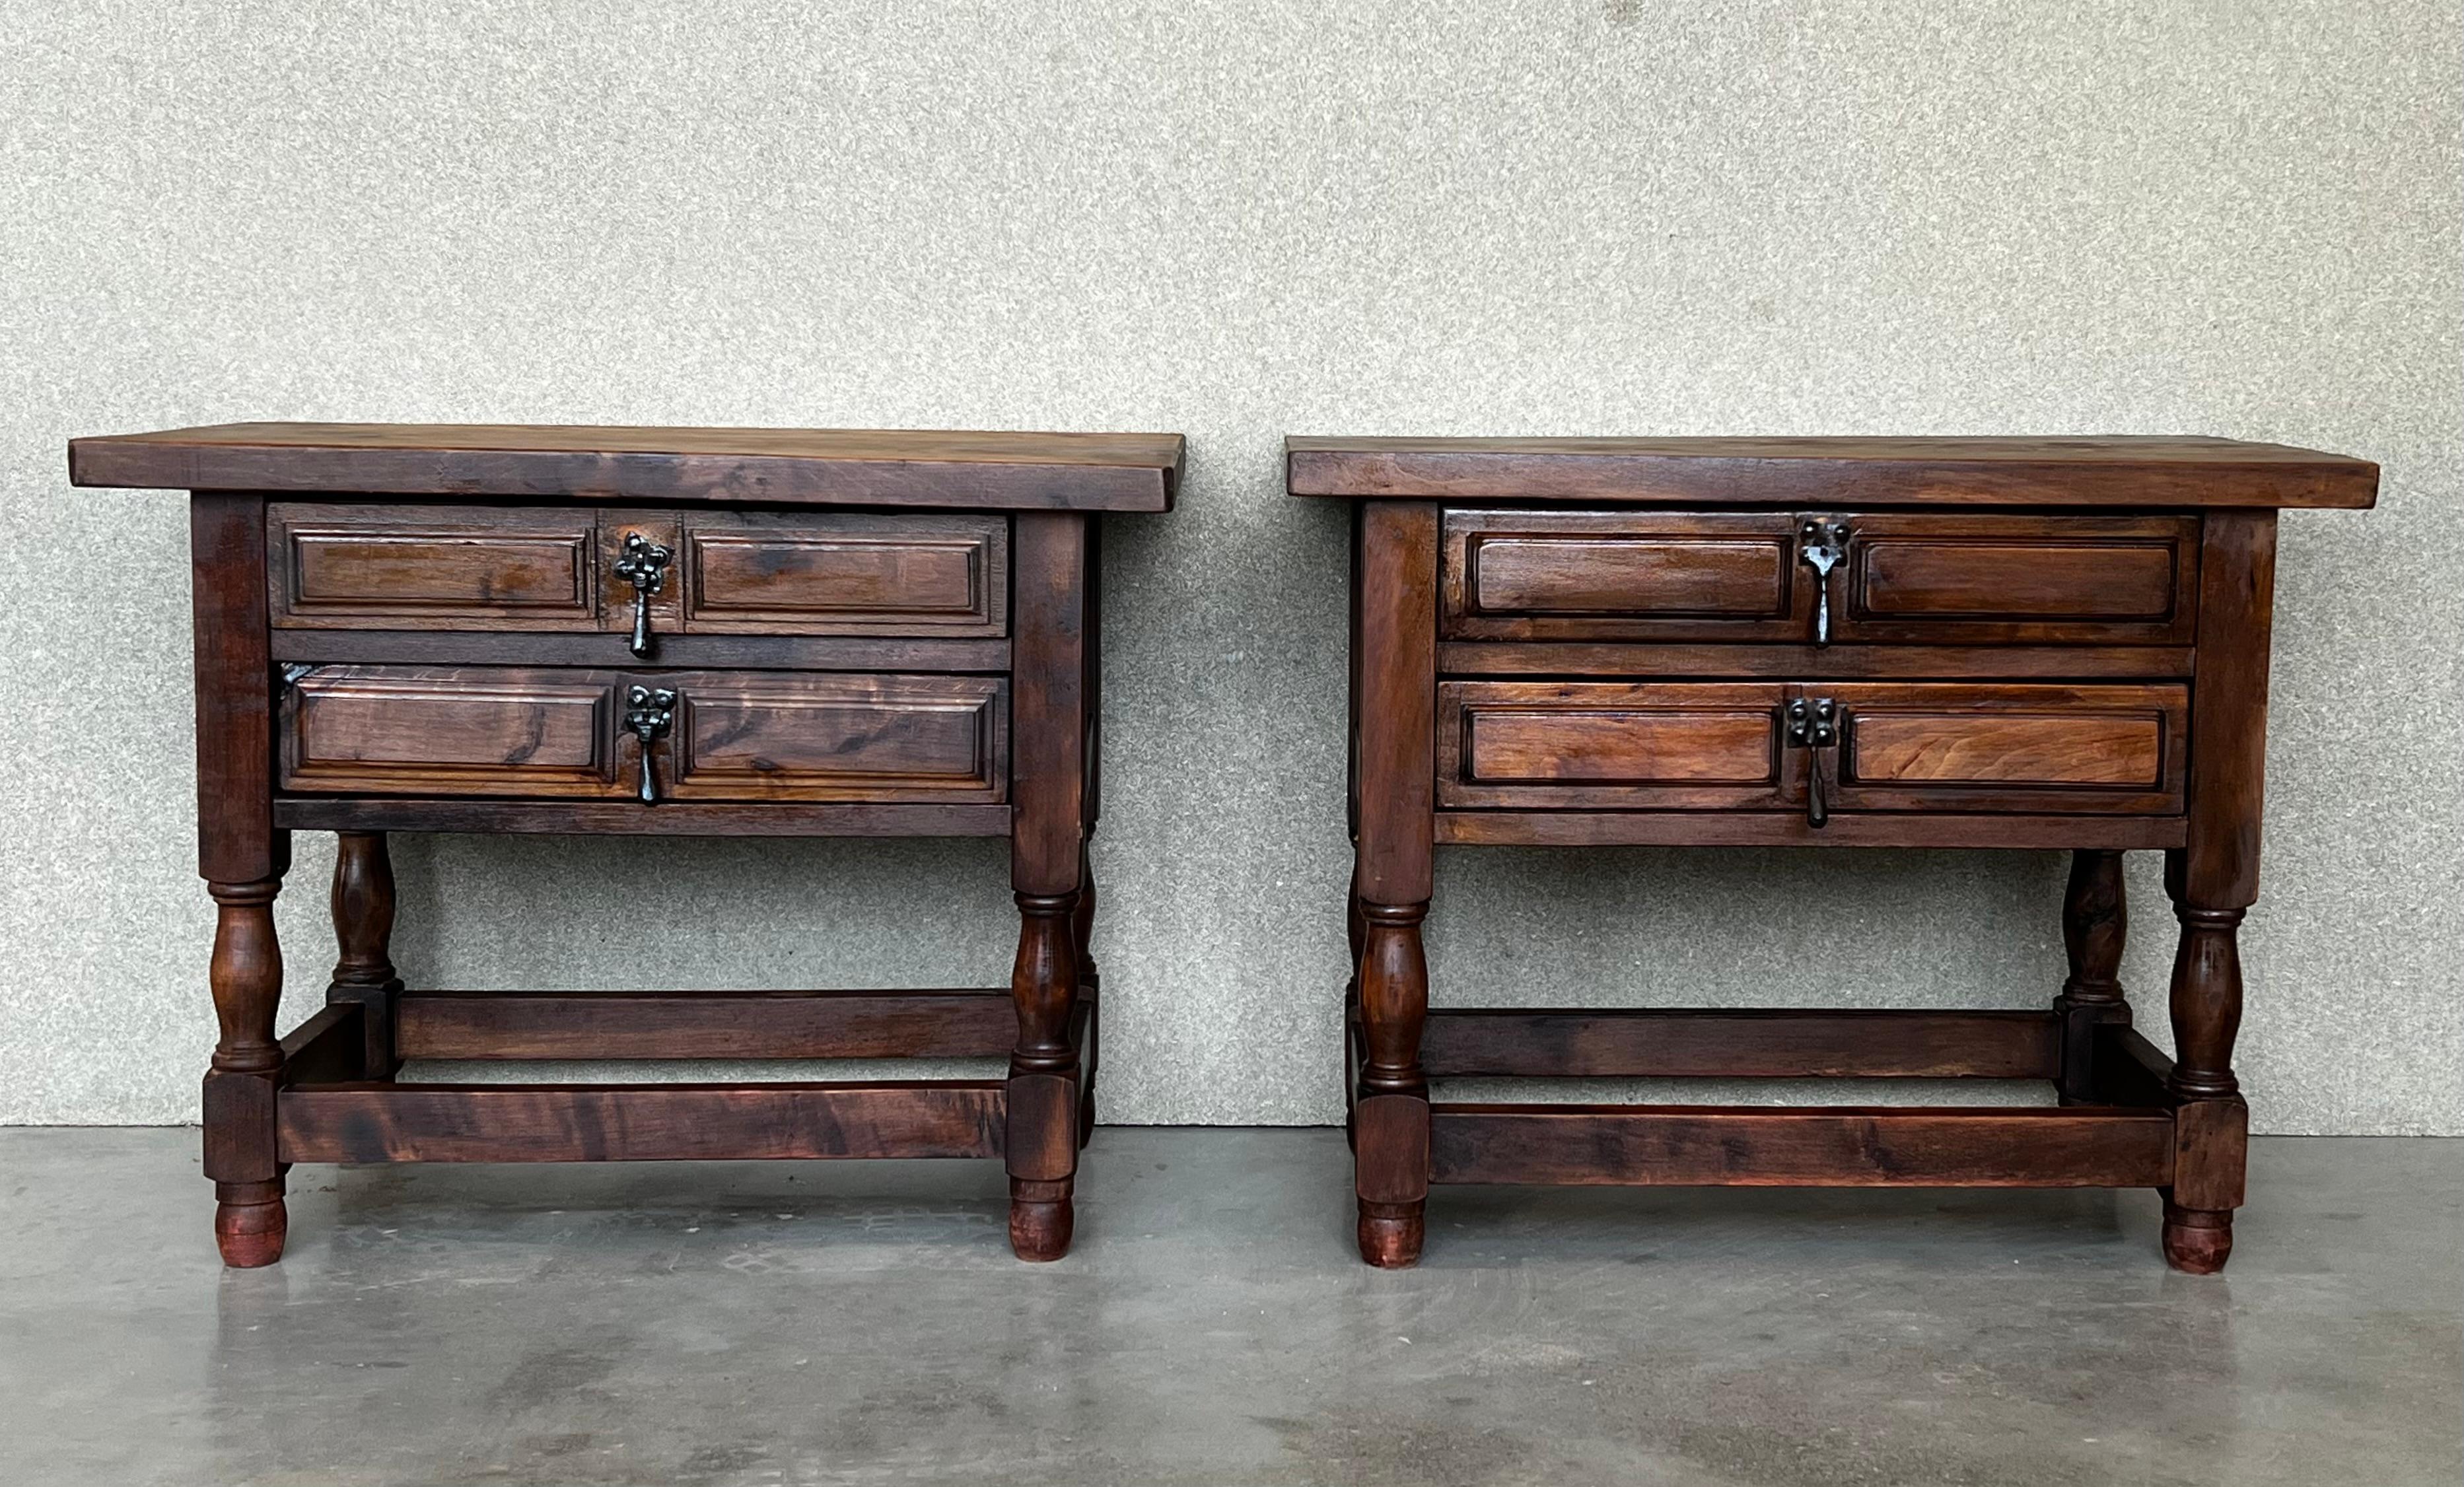 20th century pair of Spanish nightstands with two carved drawer and iron hardware and crest in the low part of the drawers.
Beautiful tables that you can use like a nightstands or side tables, end tables... or table lamp.